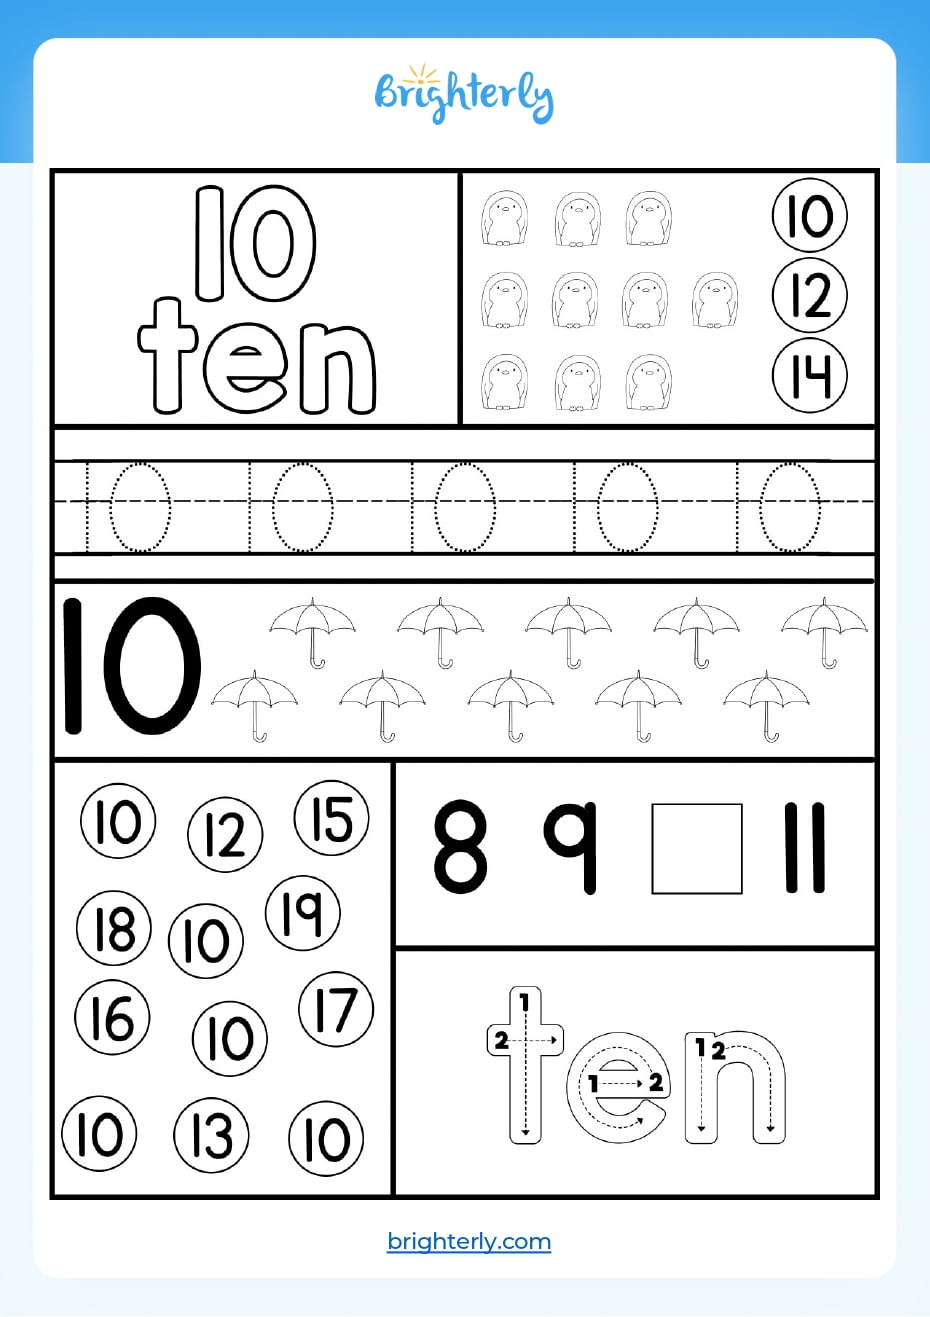 free-printable-number-10-ten-worksheets-for-kids-pdfs-brighterly-free-printable